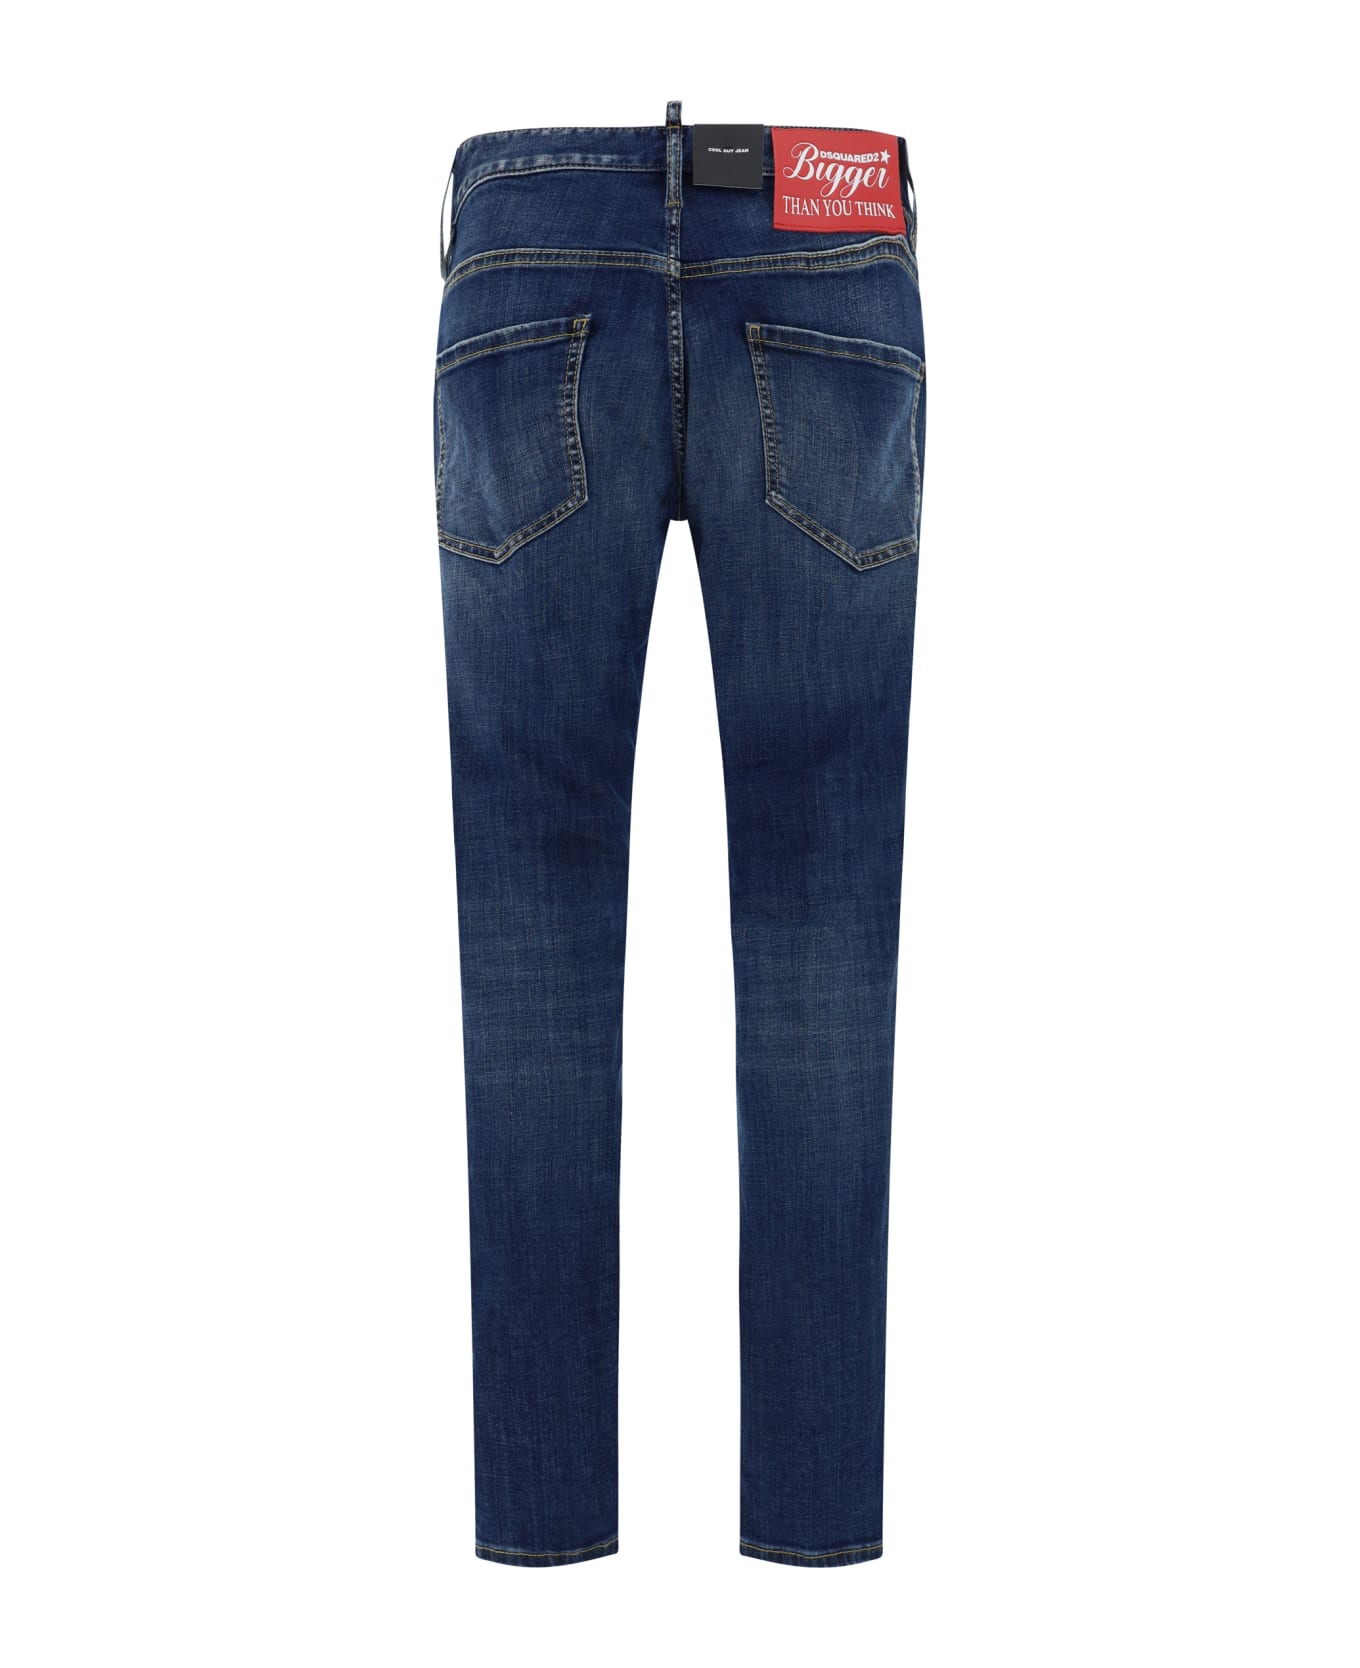 Dsquared2 'cool Guy' Jeans - Navy Blue デニム